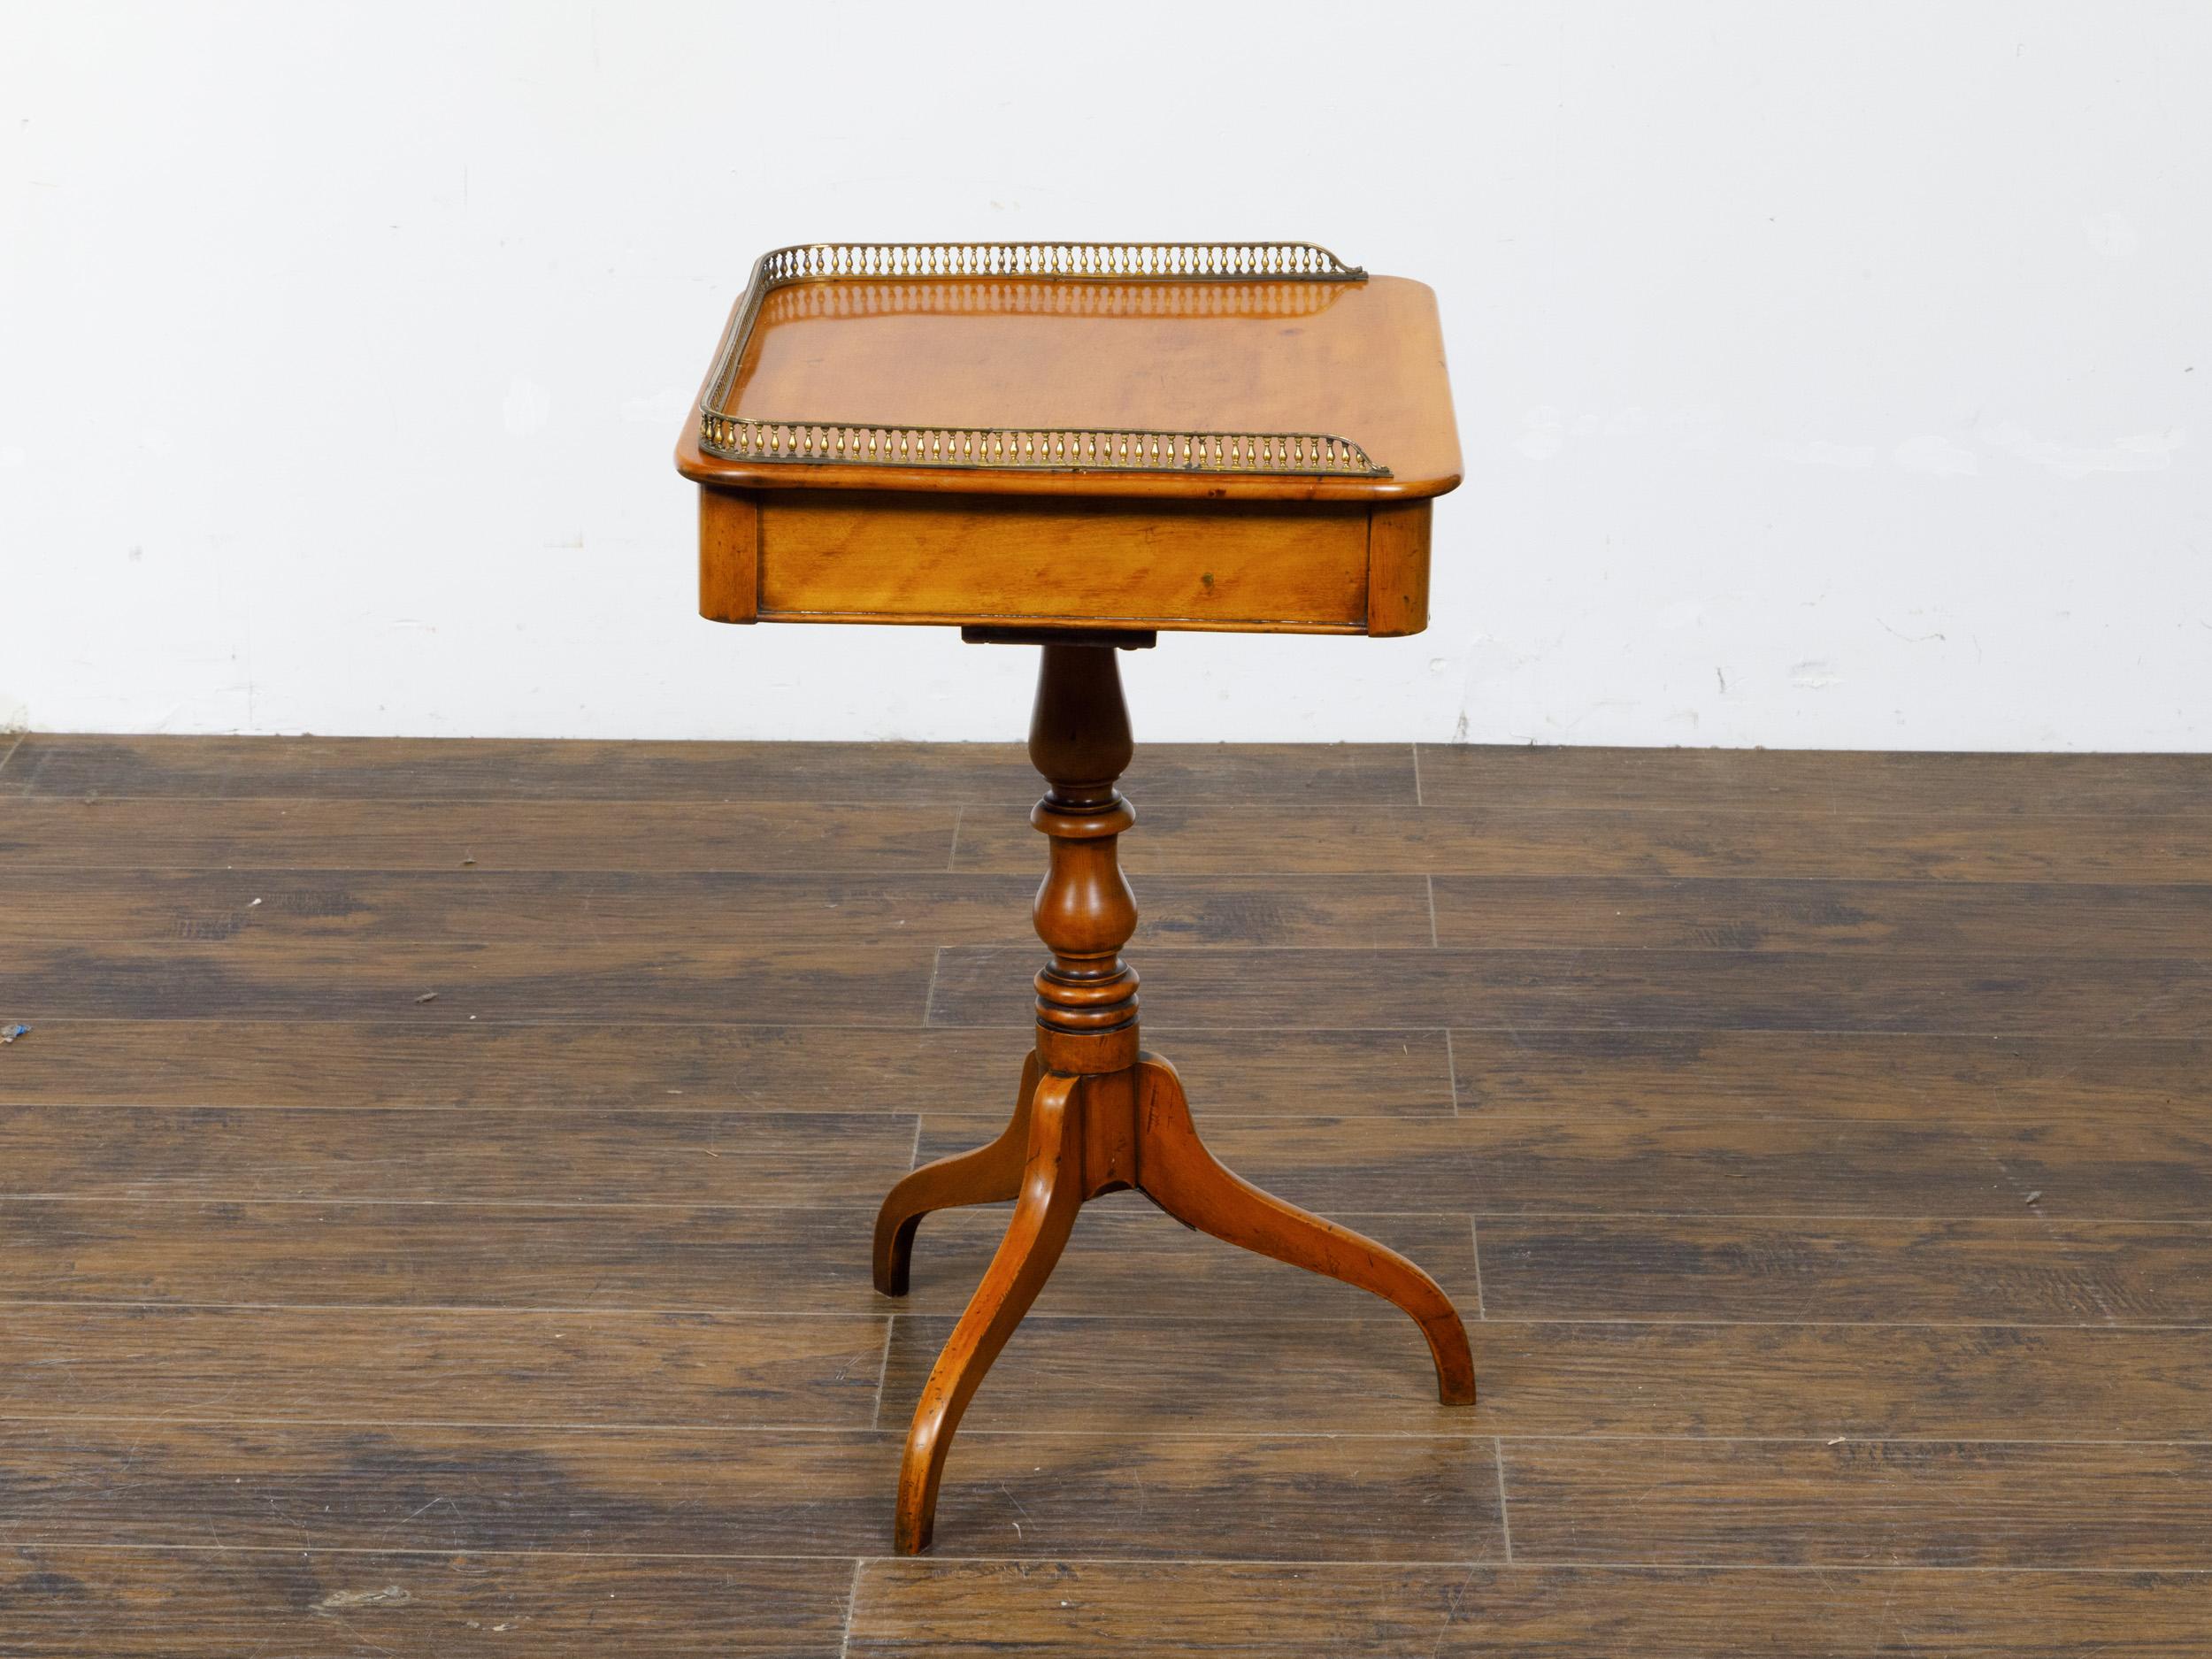 English Regency Period Fruitwood Guéridon Side Table with Pierced Brass Gallery In Good Condition For Sale In Atlanta, GA